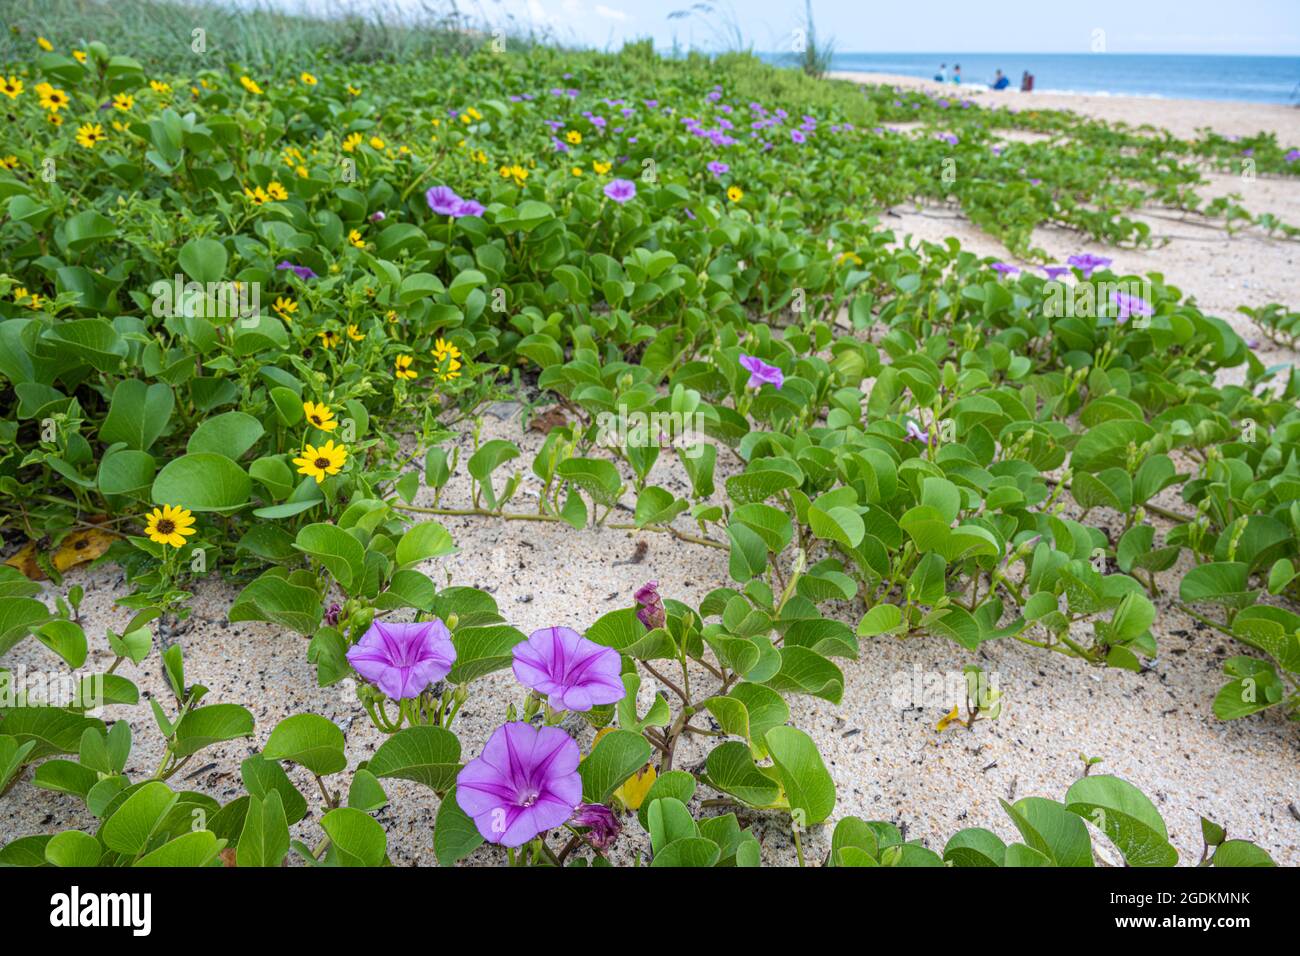 Beach dune vines with purple and yellow flowers at Mala Compra Park Beach in Palm Coast, Florida. (USA) Stock Photo